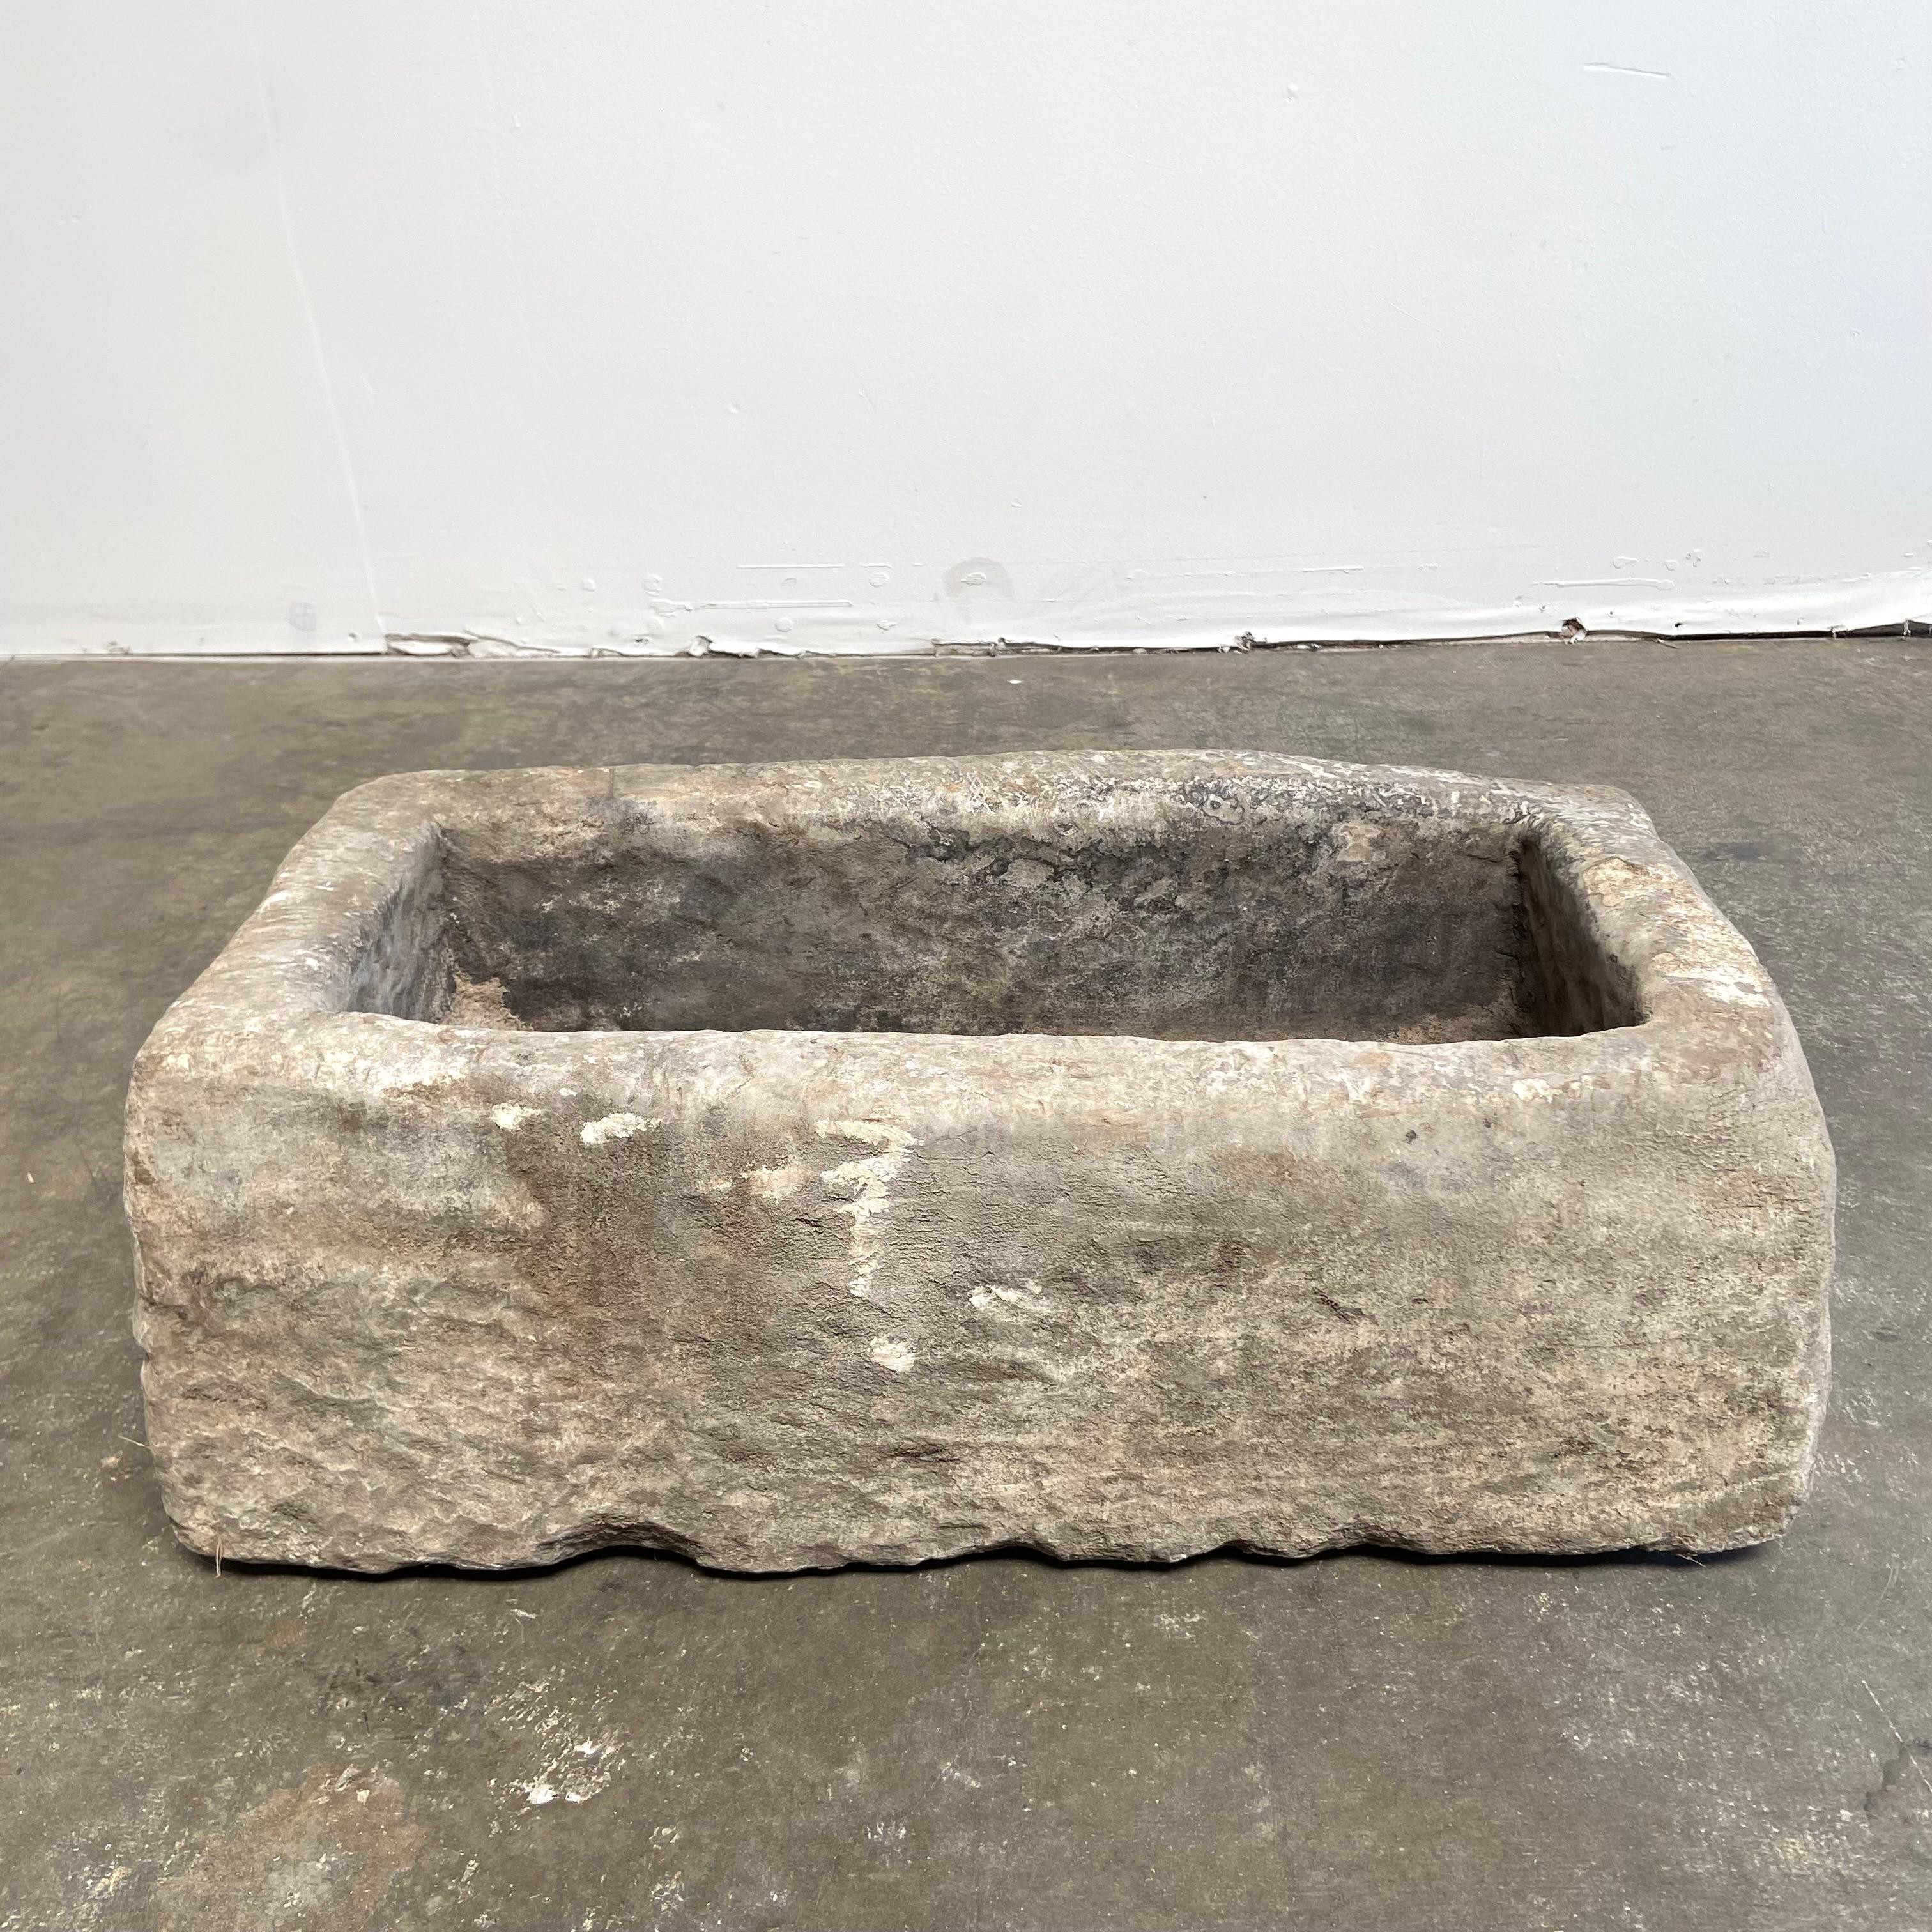 Antique European limestone trough
Great for use as a fountain, planter, or garden element.
Size: 34”w x 17”d x 12”h
tree not included.